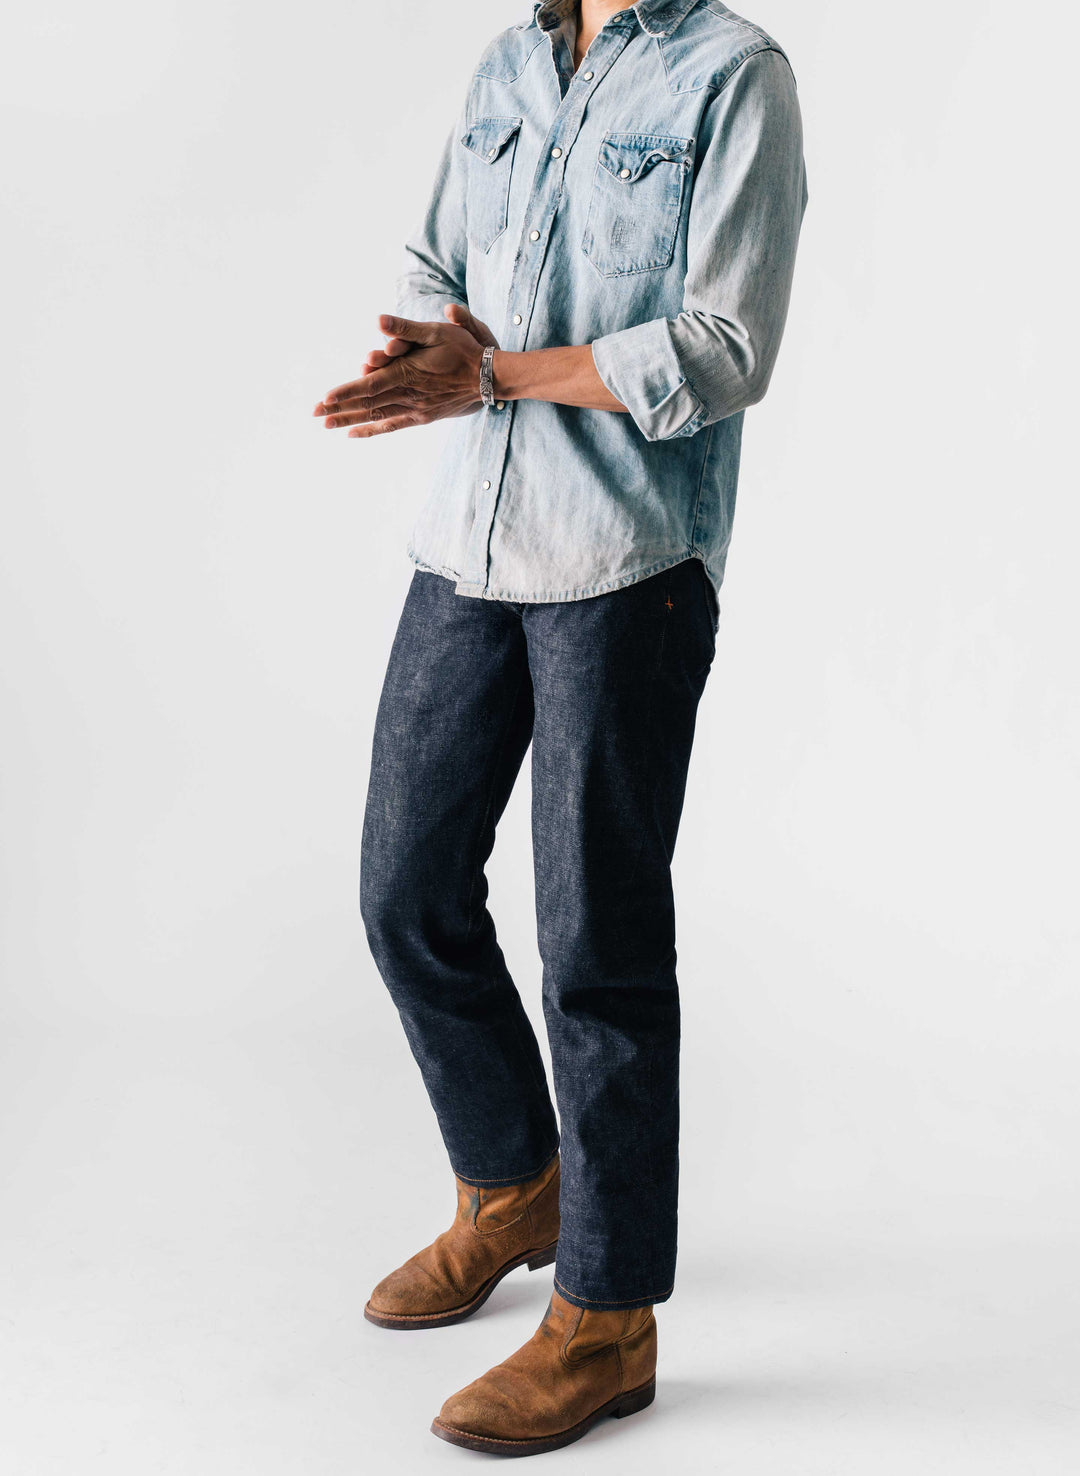 a man in a blue shirt and jeans